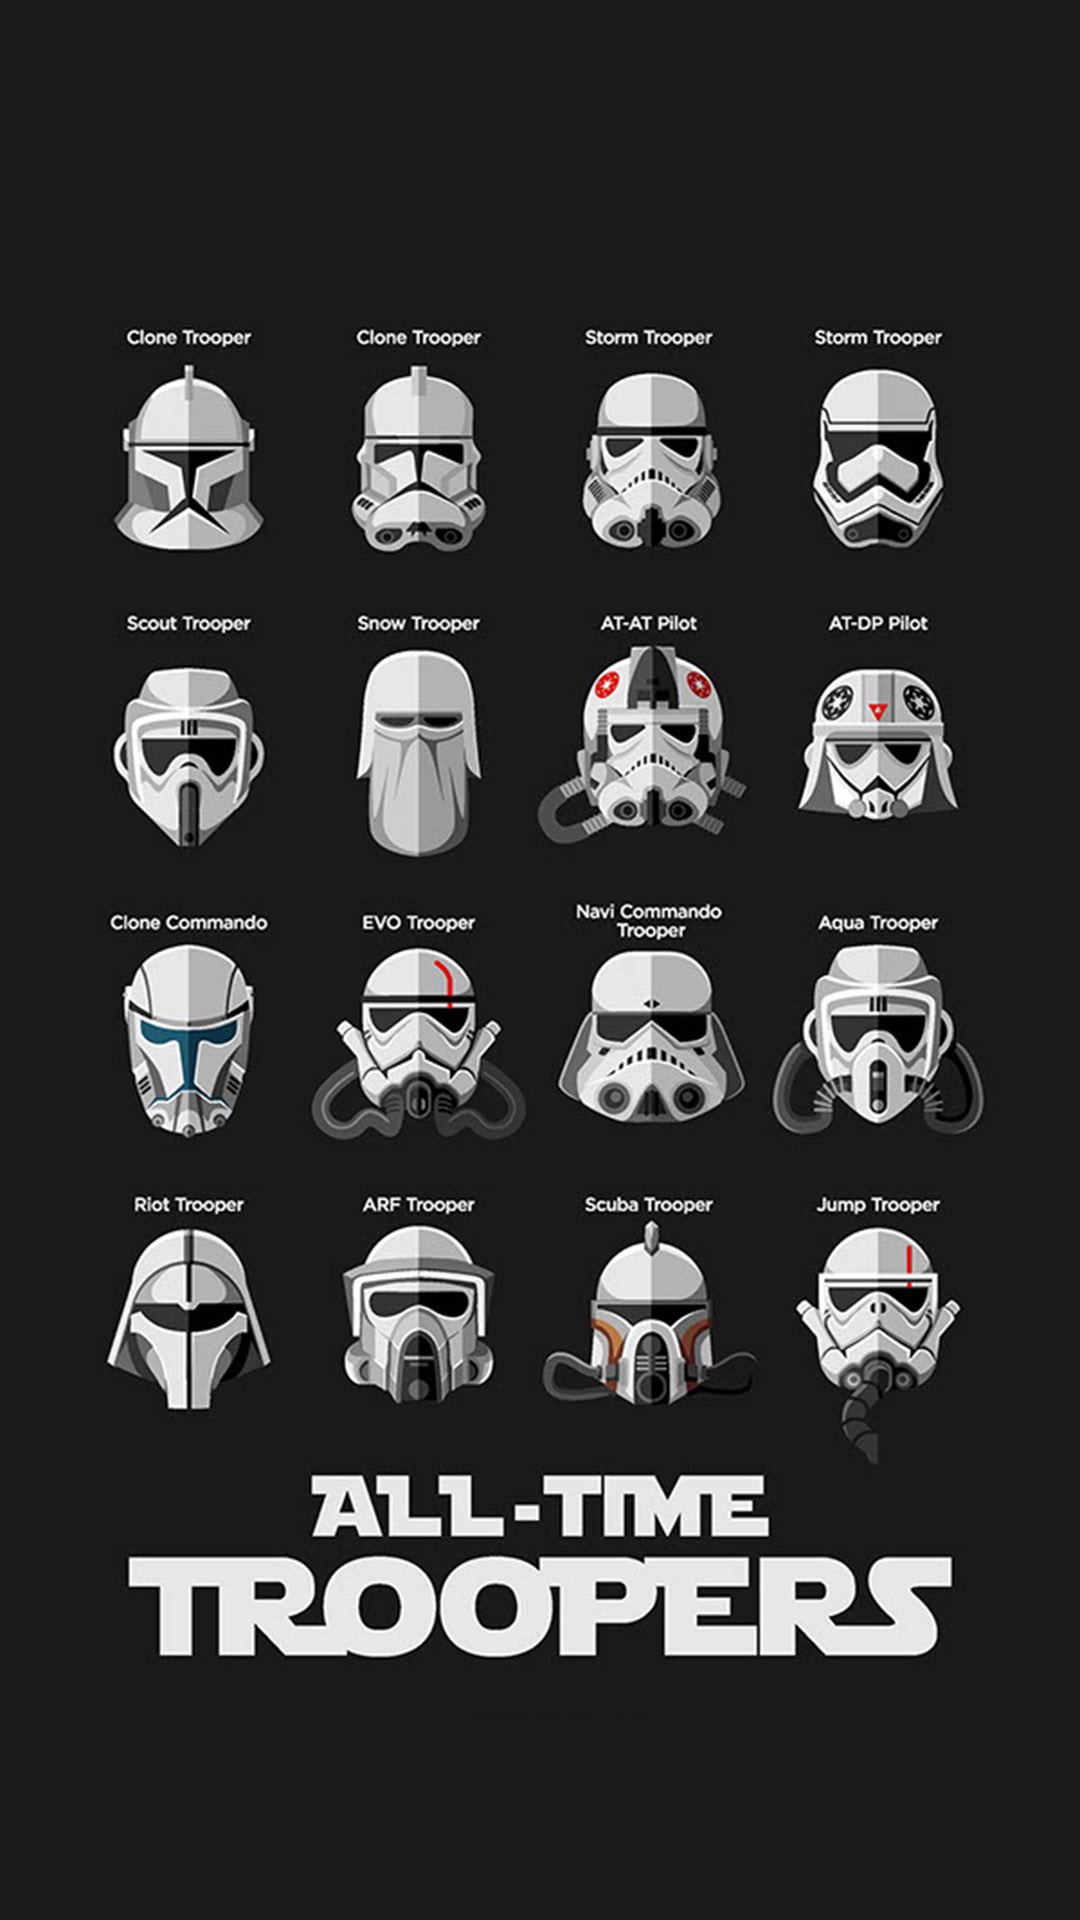 All Time Troopers スター ウォーズのスマホ壁紙 Iphone Wallpapers